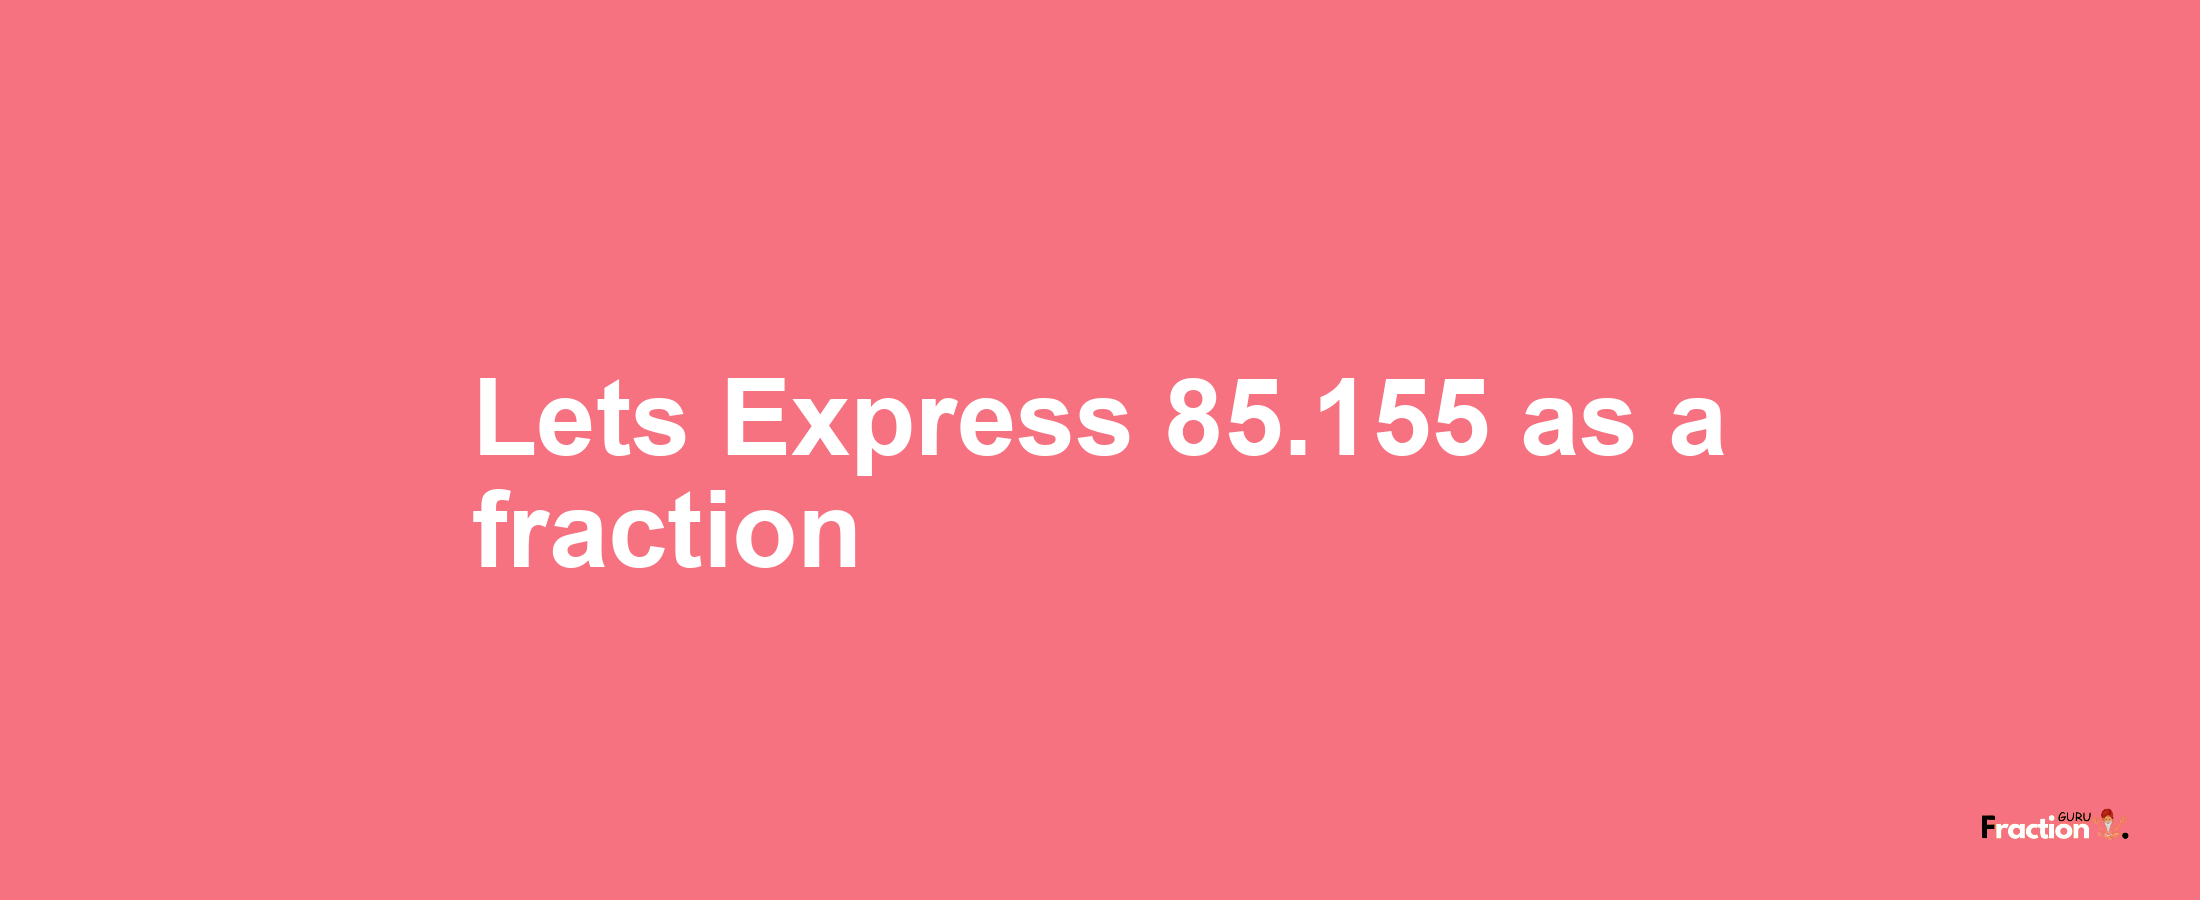 Lets Express 85.155 as afraction